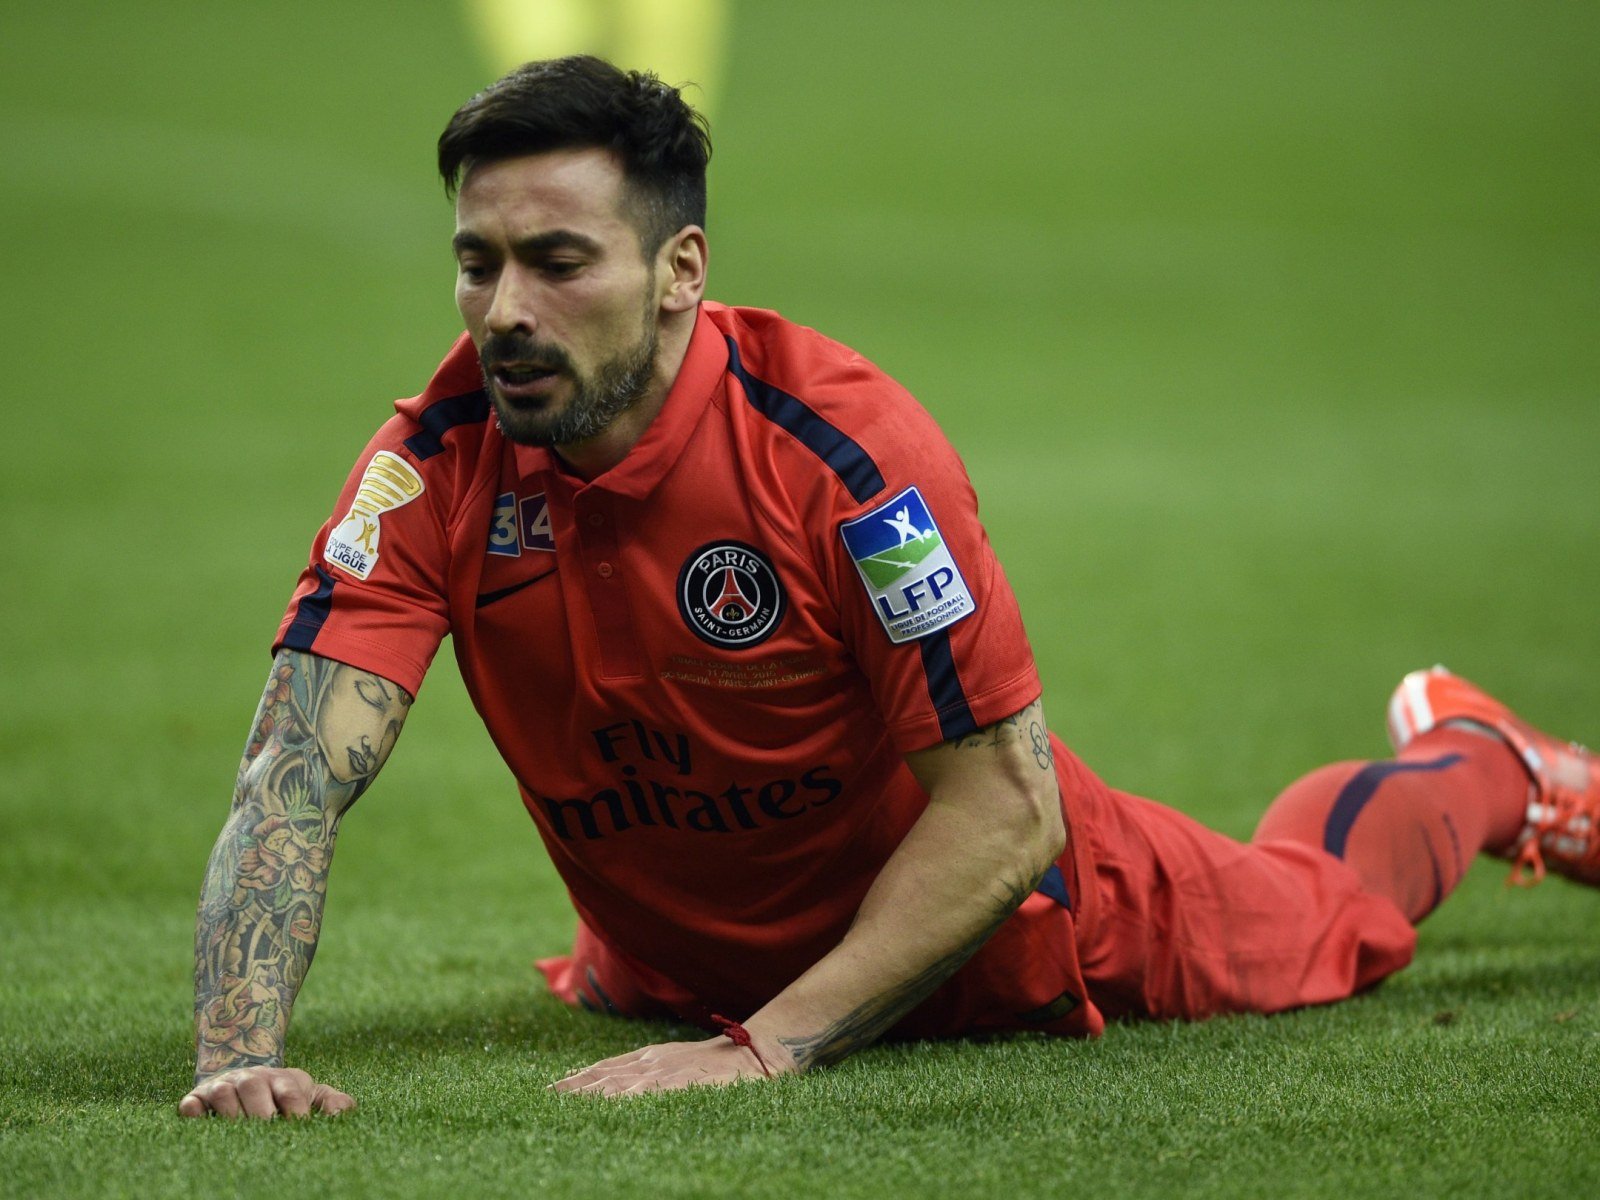 PSG Star Ezequiel Lavezzi Instantly Becomes one of World's Richest Players in China Move